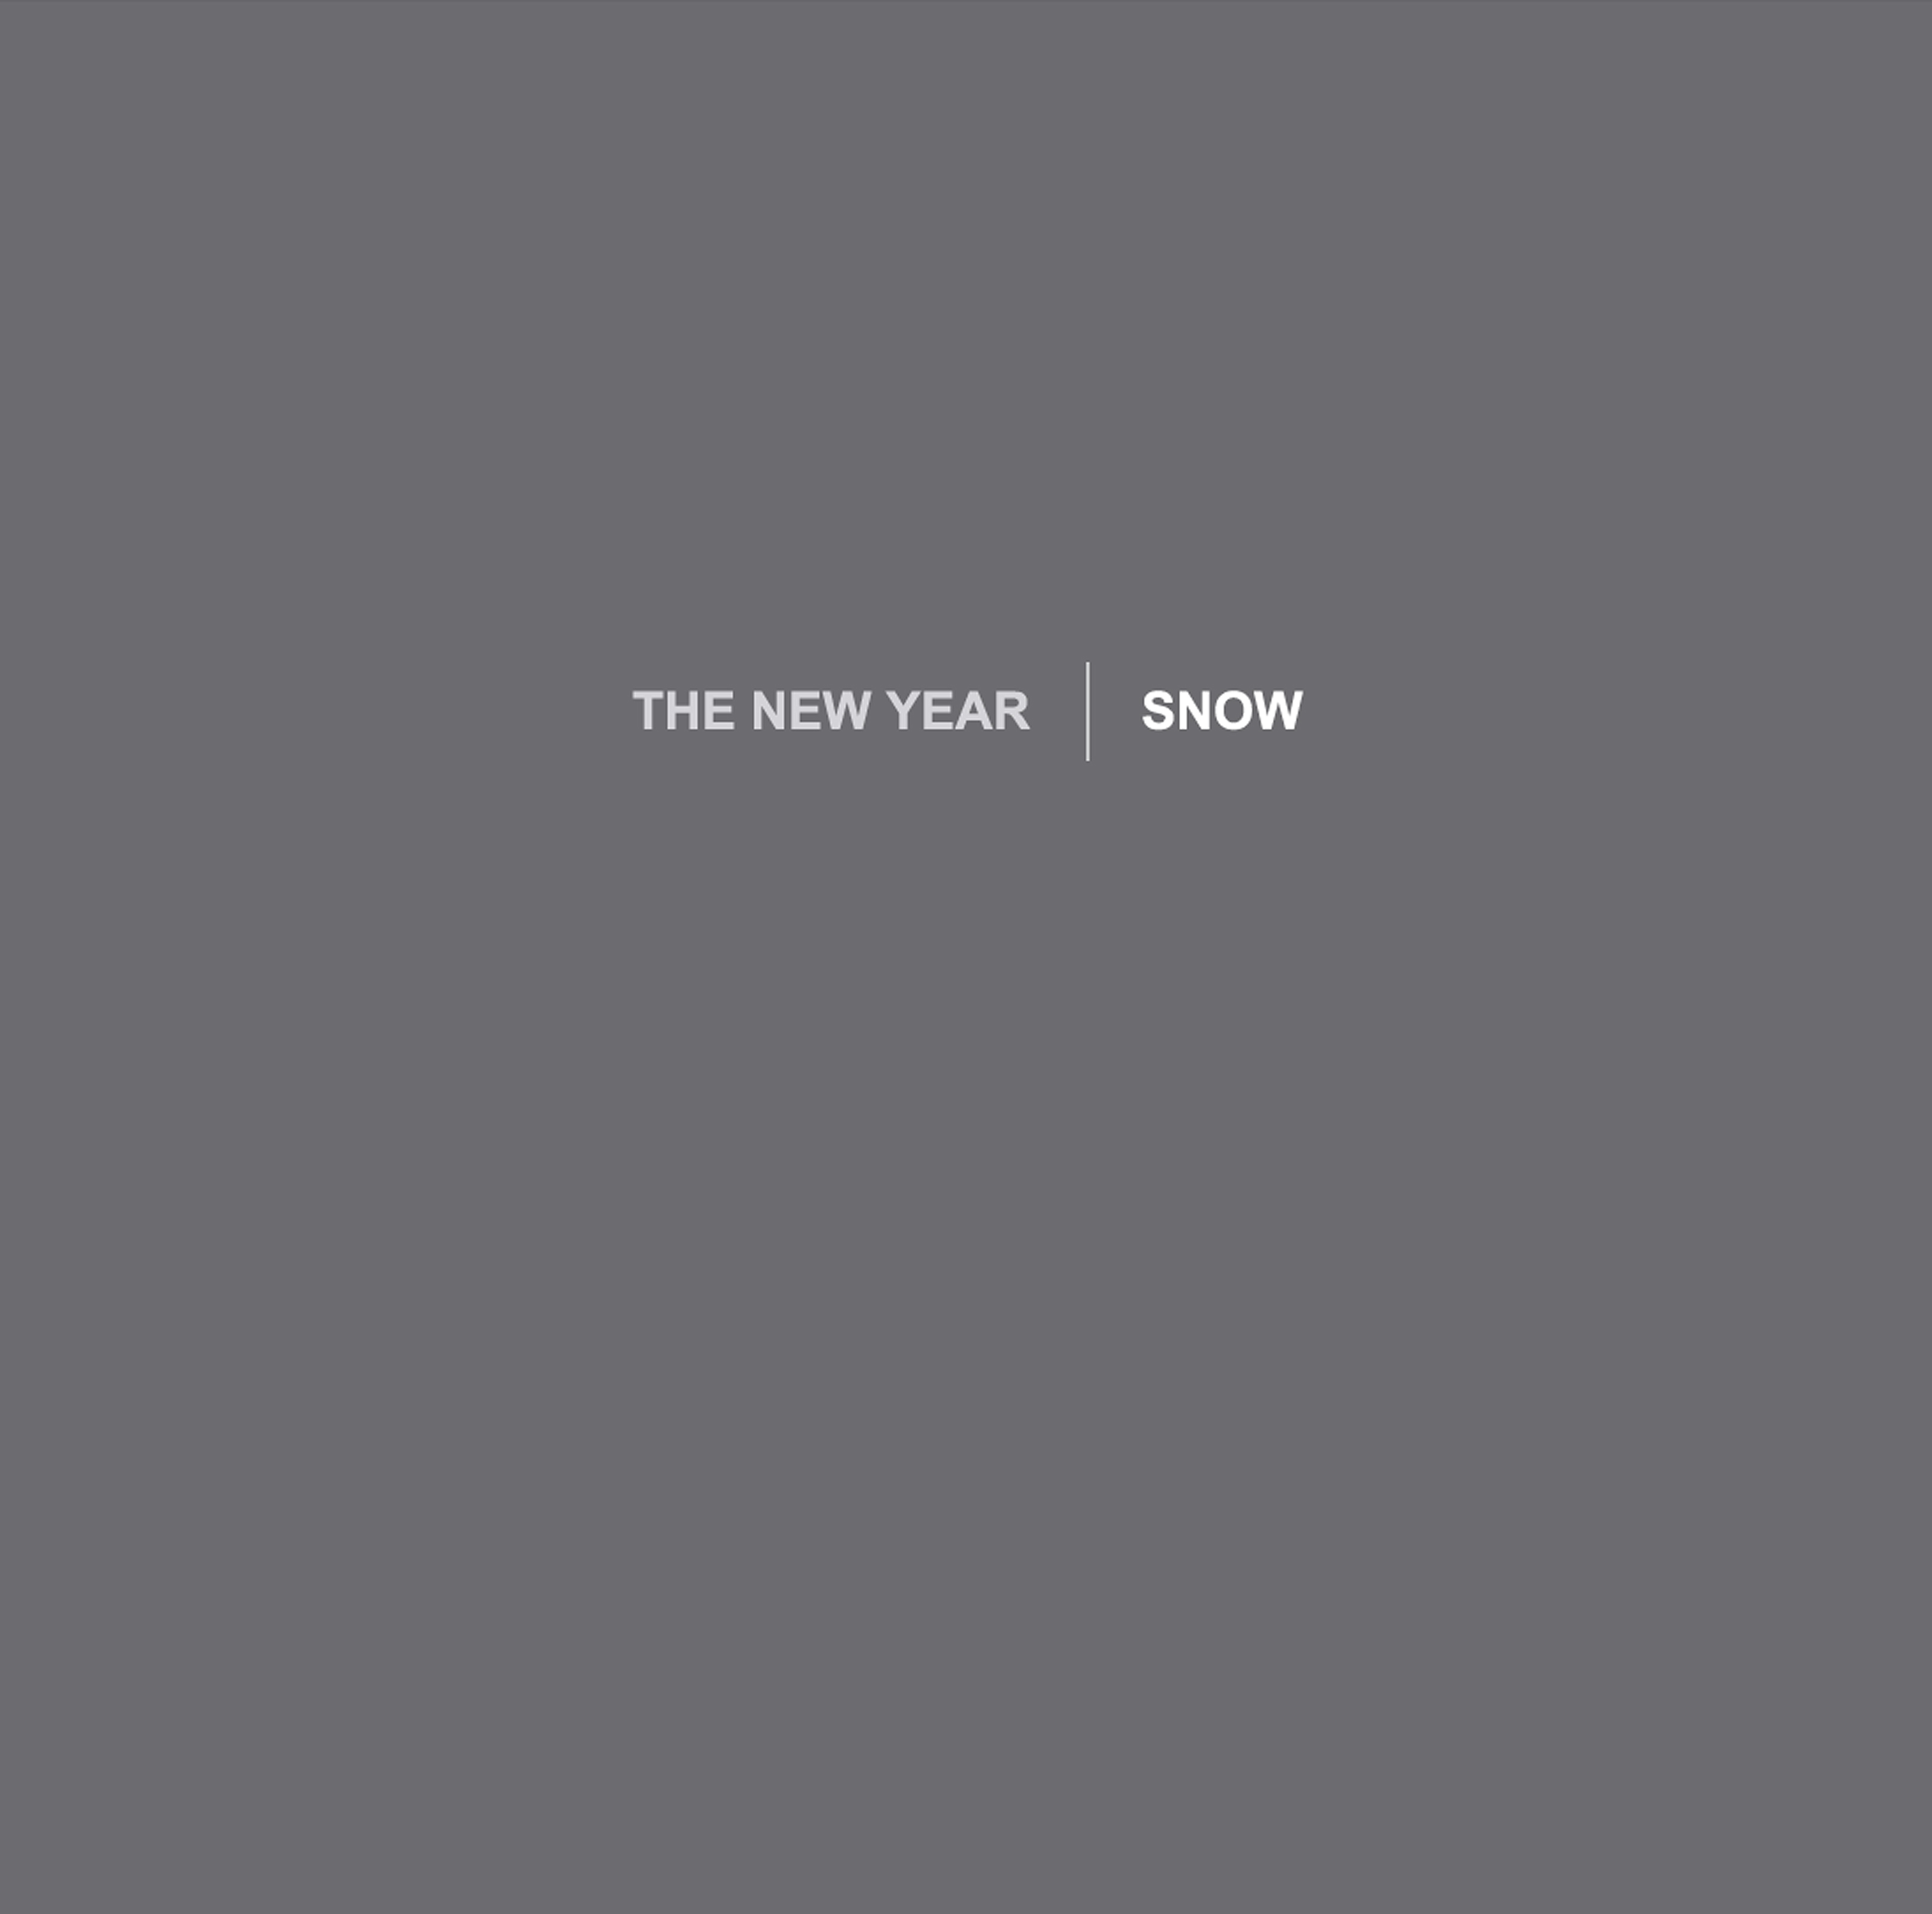 THE NEW YEAR SNOW